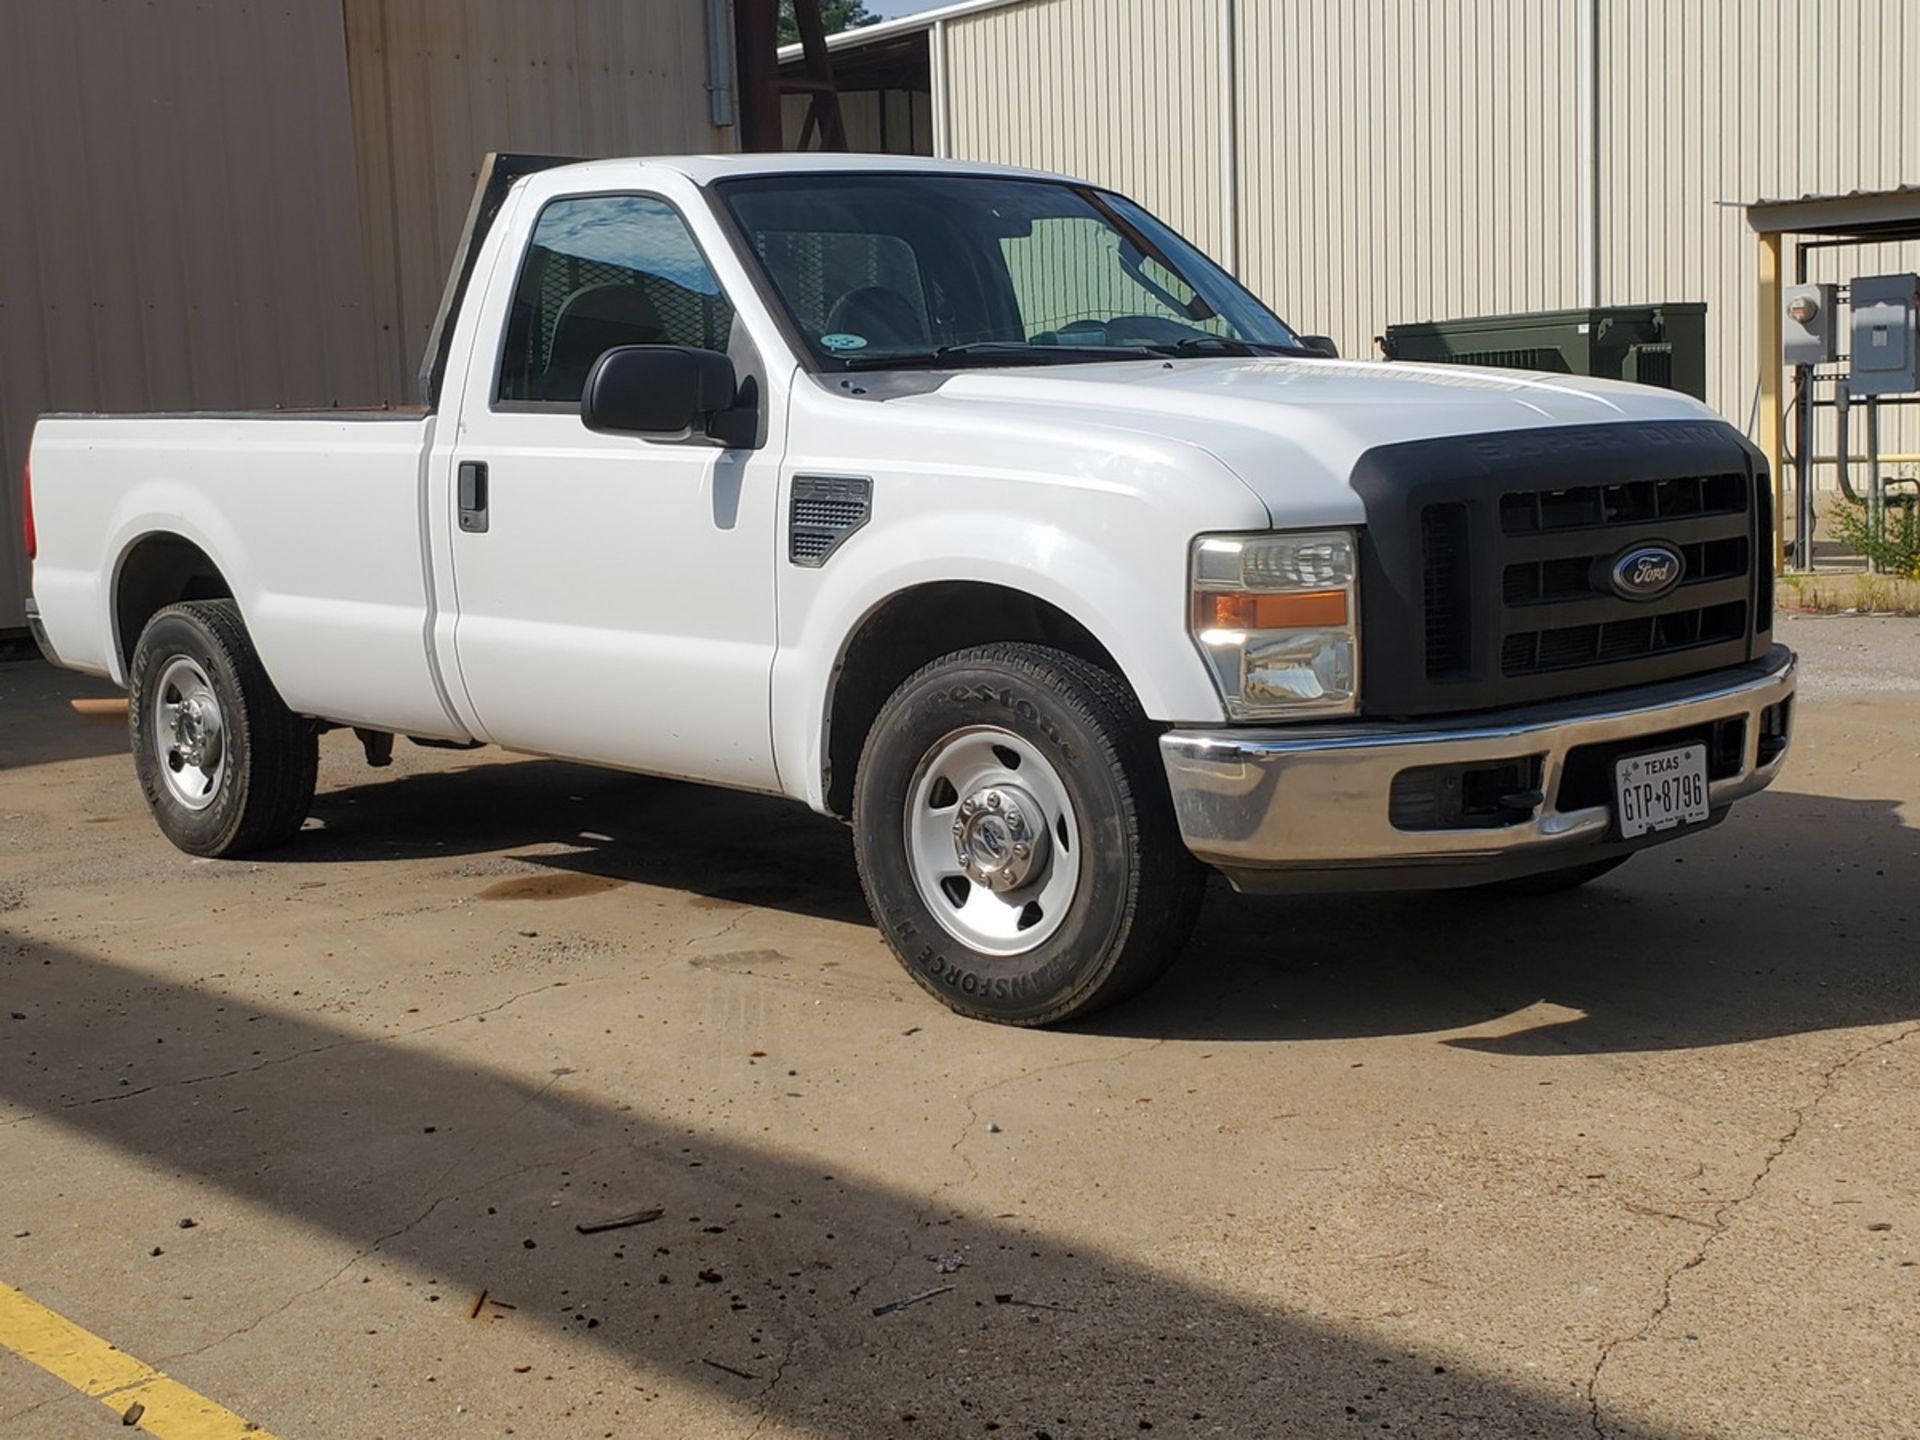 2008 Ford F-250 Pickup V8 Engine, Vin: 1FTN20518ED94781, 95,506 Mileage, Plate: TX GTP-8796